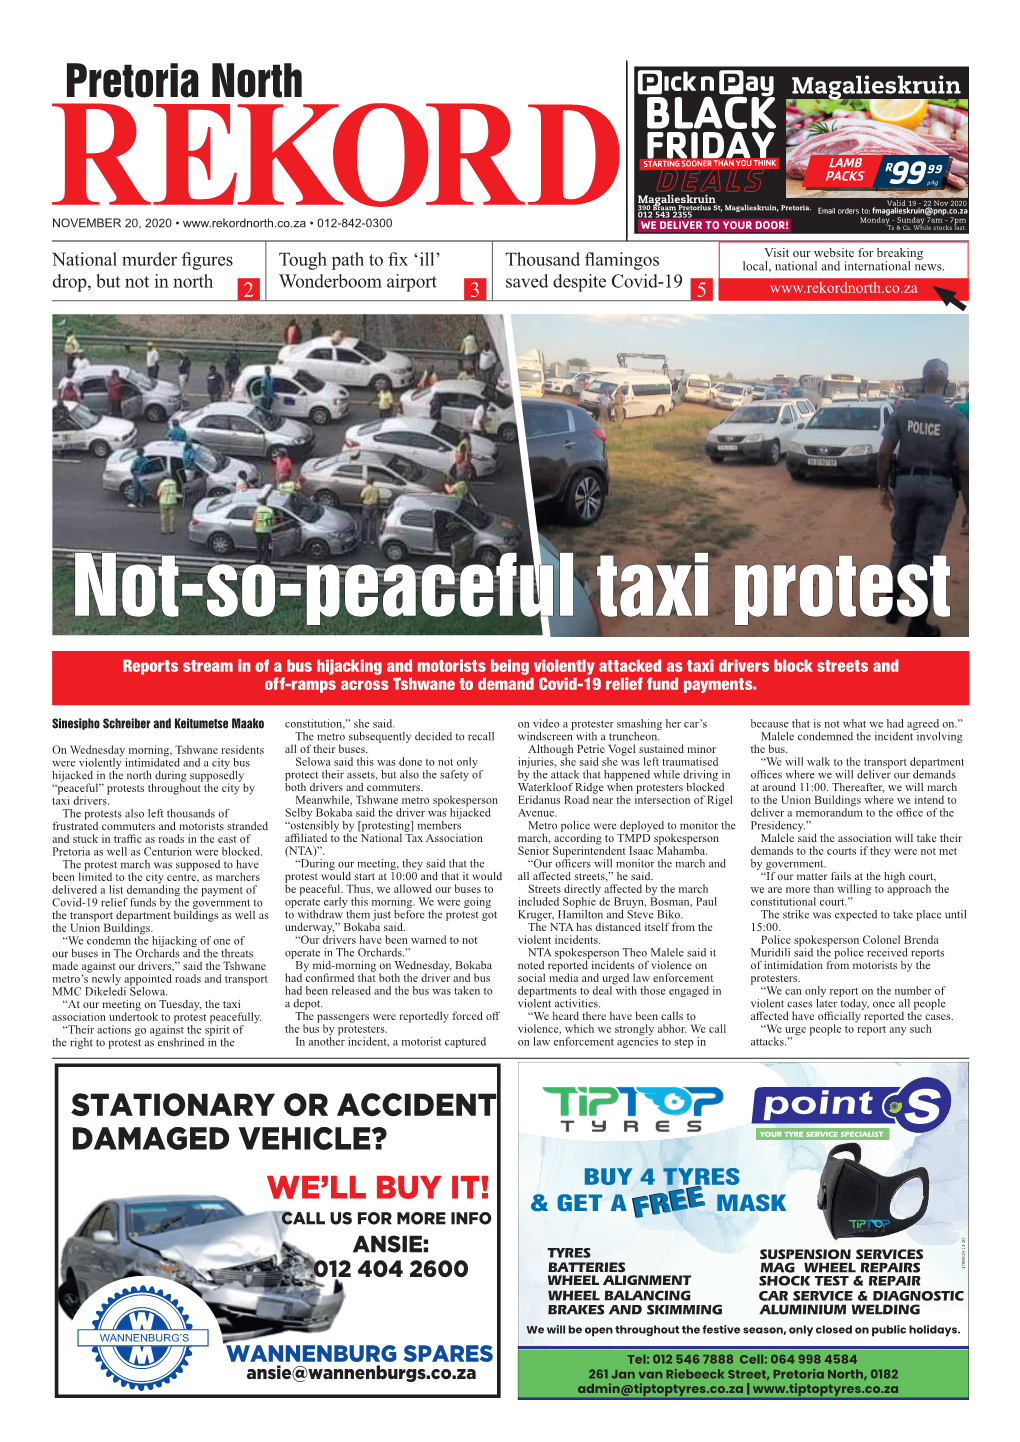 Not-So-Peaceful Taxi Protest